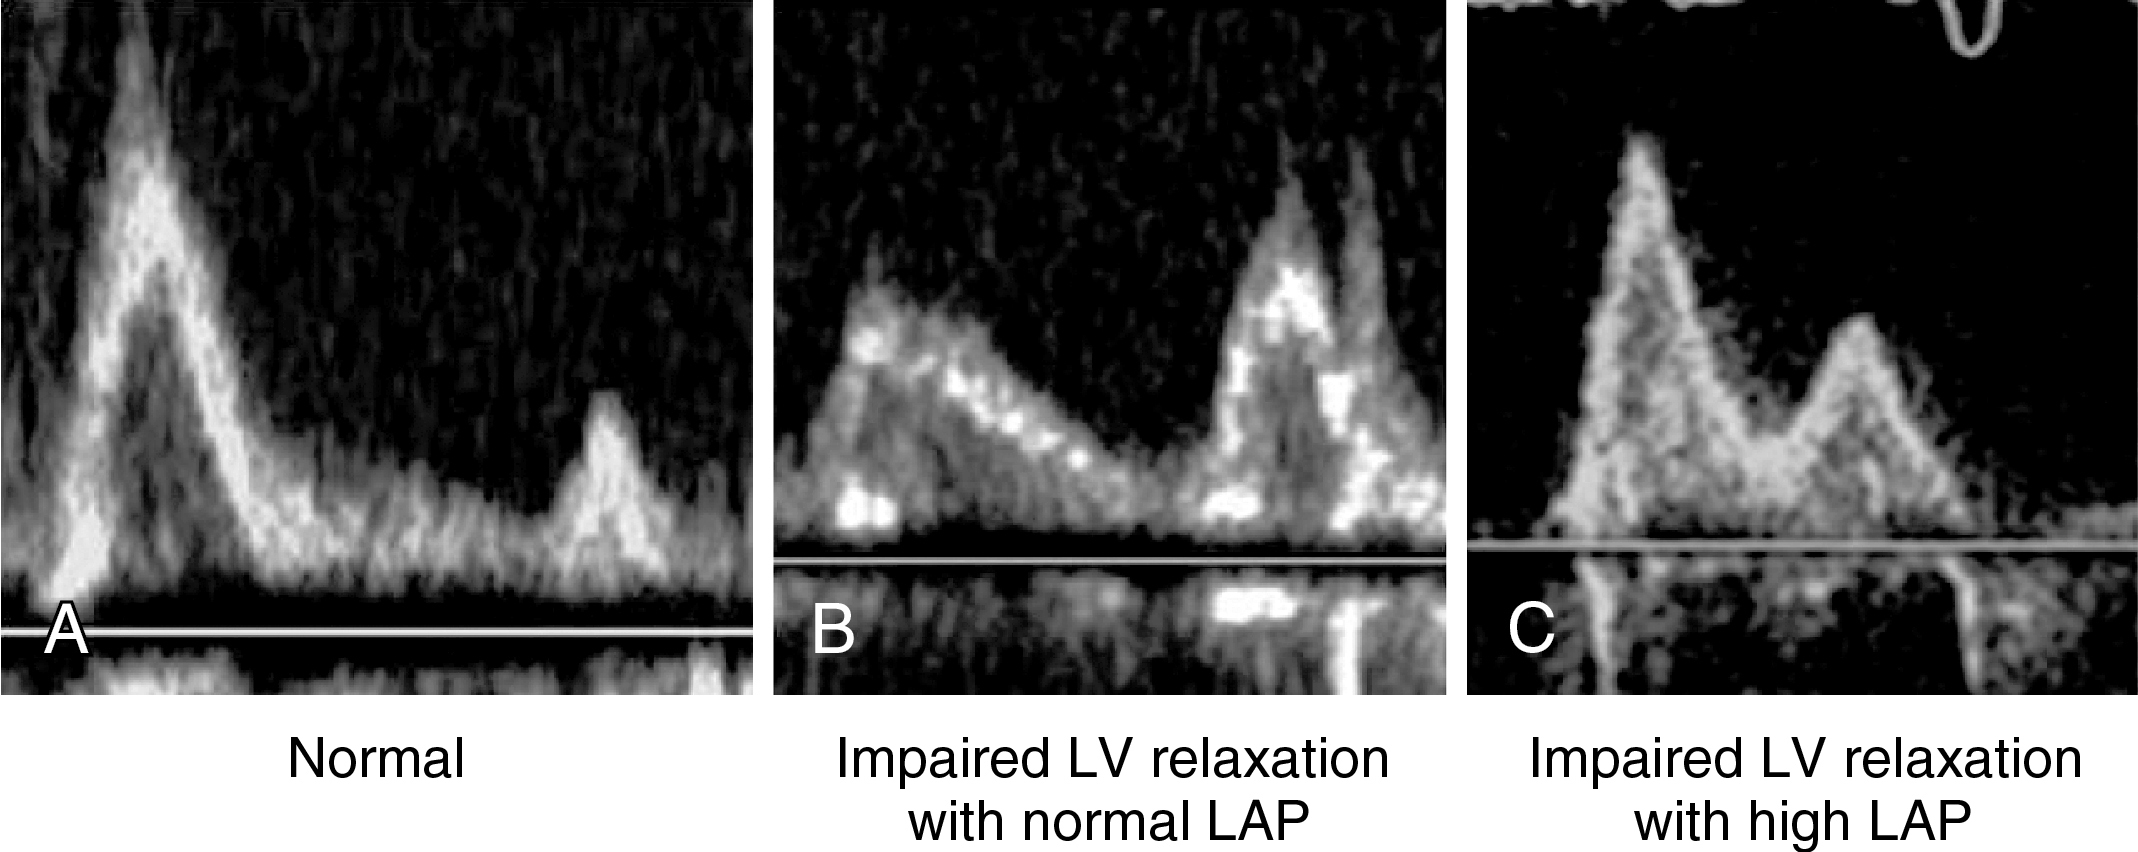 Figure 32-1, Mitral flow recorded with pulsed wave Doppler. A, Normal pattern; B, Impairment of left ventricular (LV) relaxation with normal left atrial pressure (LAP); C, Impairment of LV relaxation with high LAP.